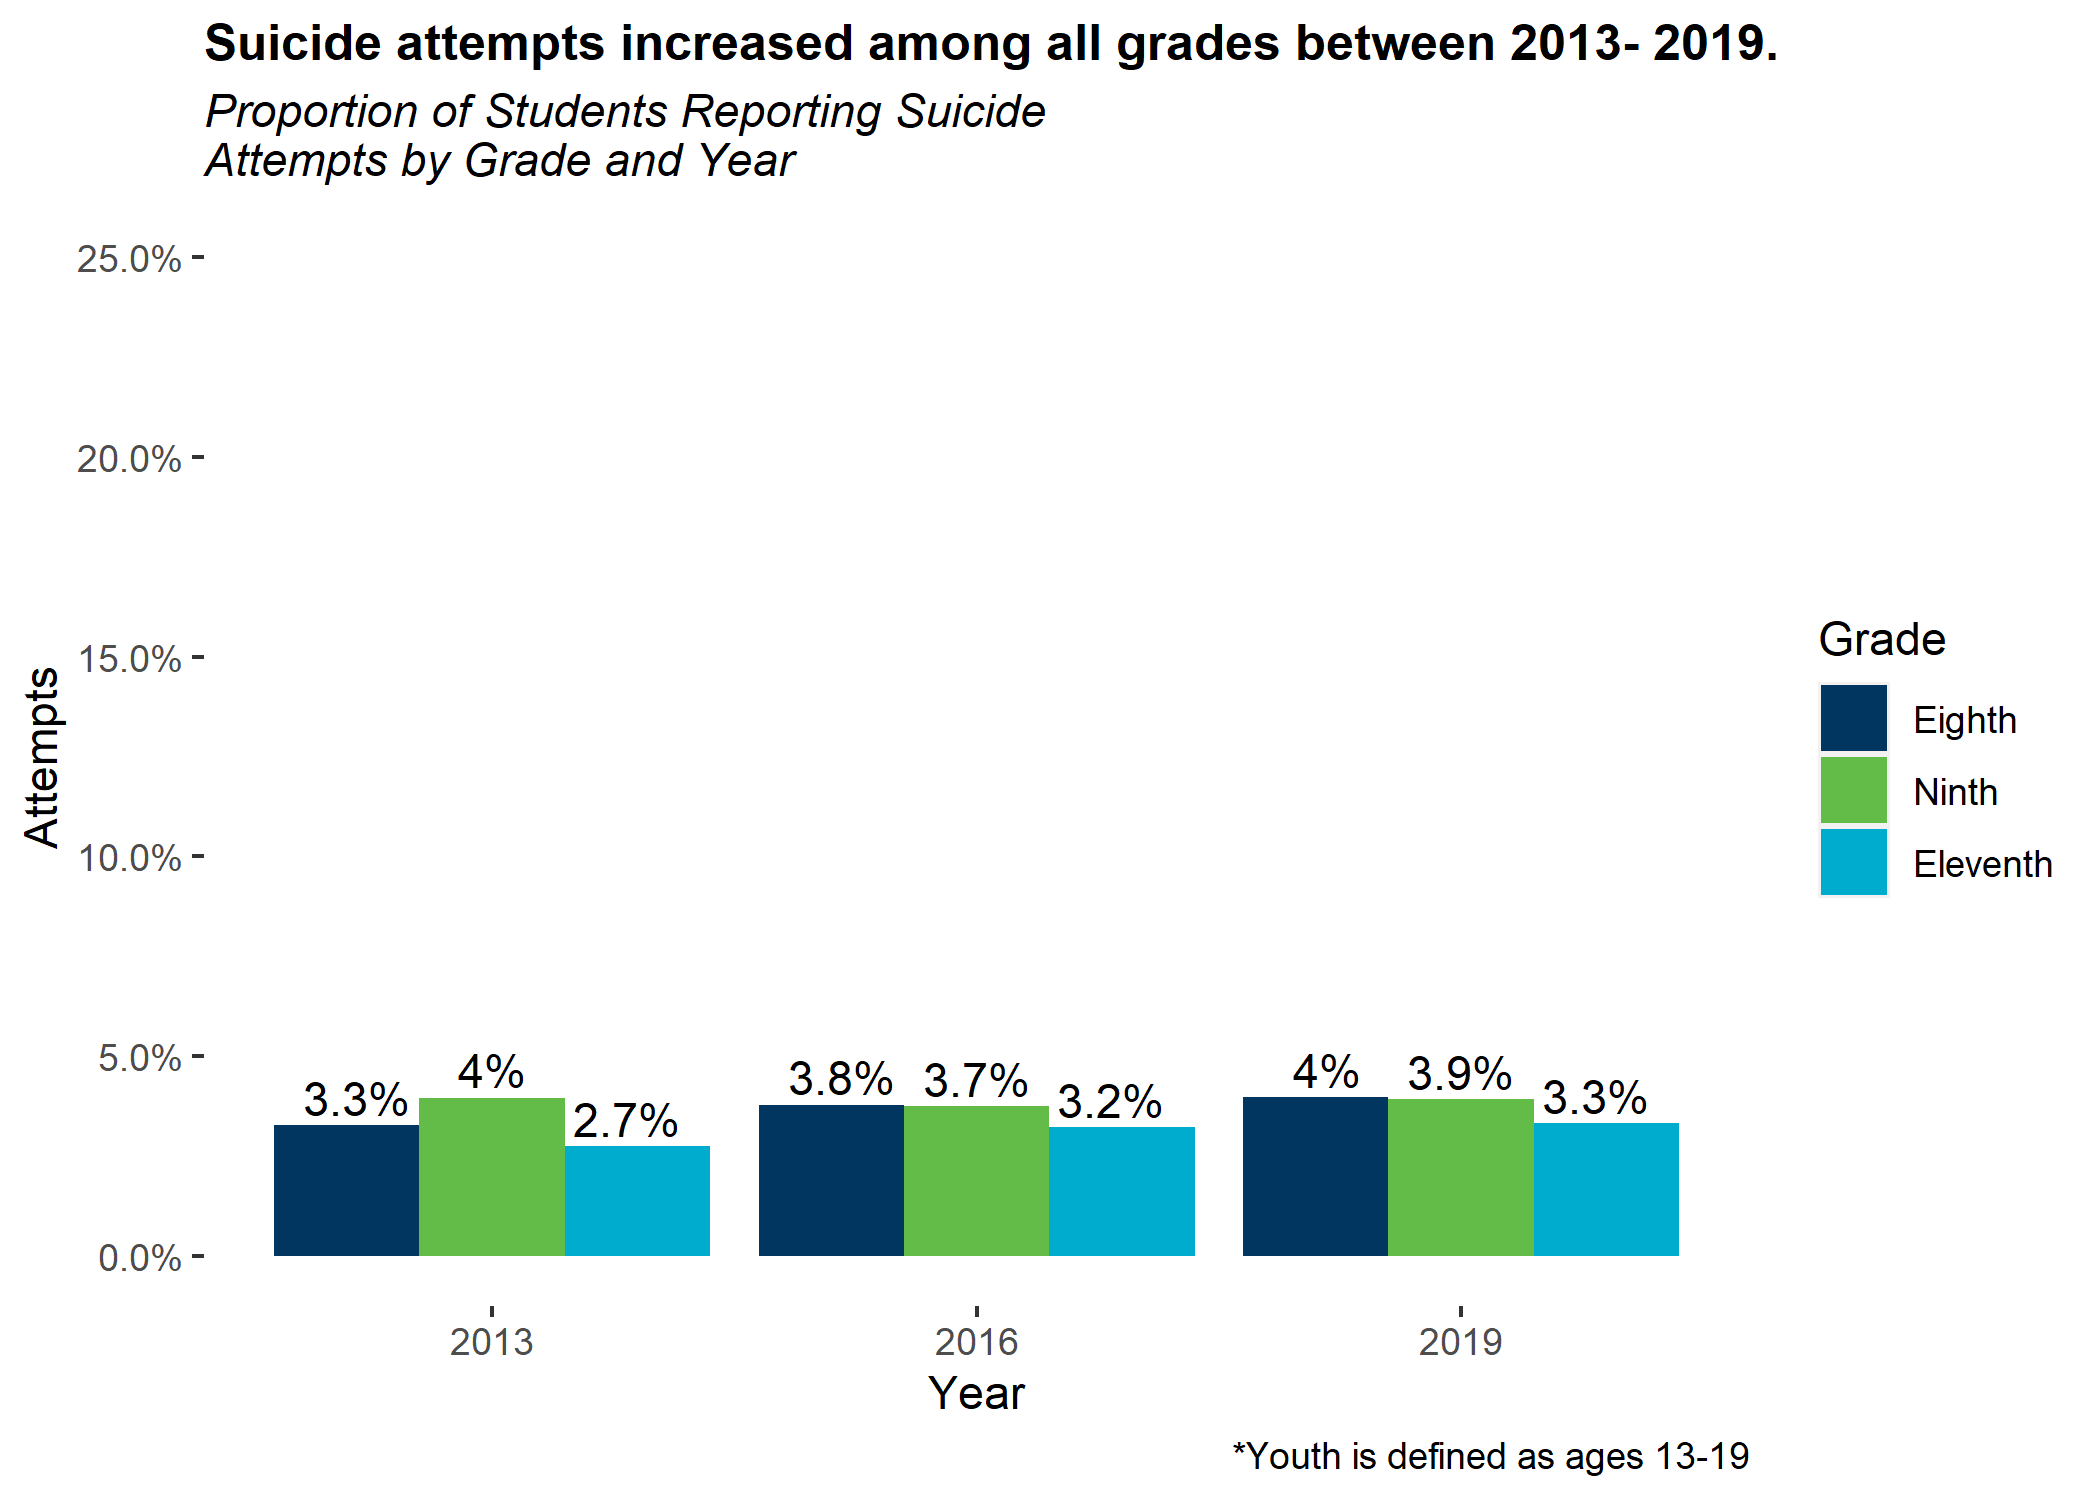 Proportion of students reporting suicide attempts by grade and year.
Suicide attempts increased among all grades between 2013-2019